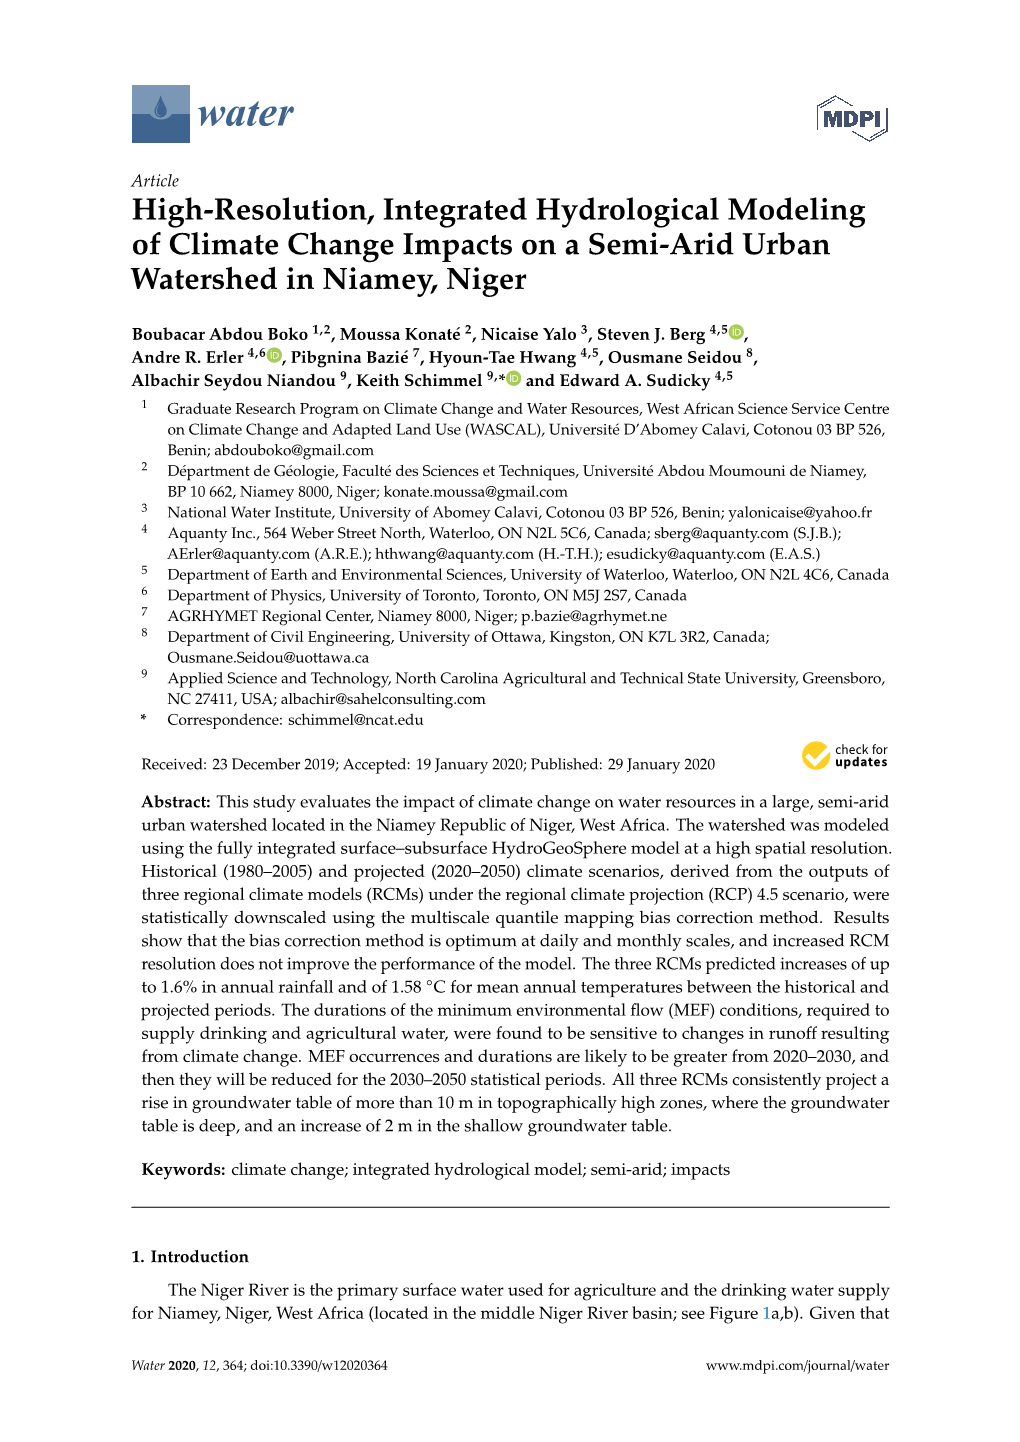 High-Resolution, Integrated Hydrological Modeling of Climate Change Impacts on a Semi-Arid Urban Watershed in Niamey, Niger